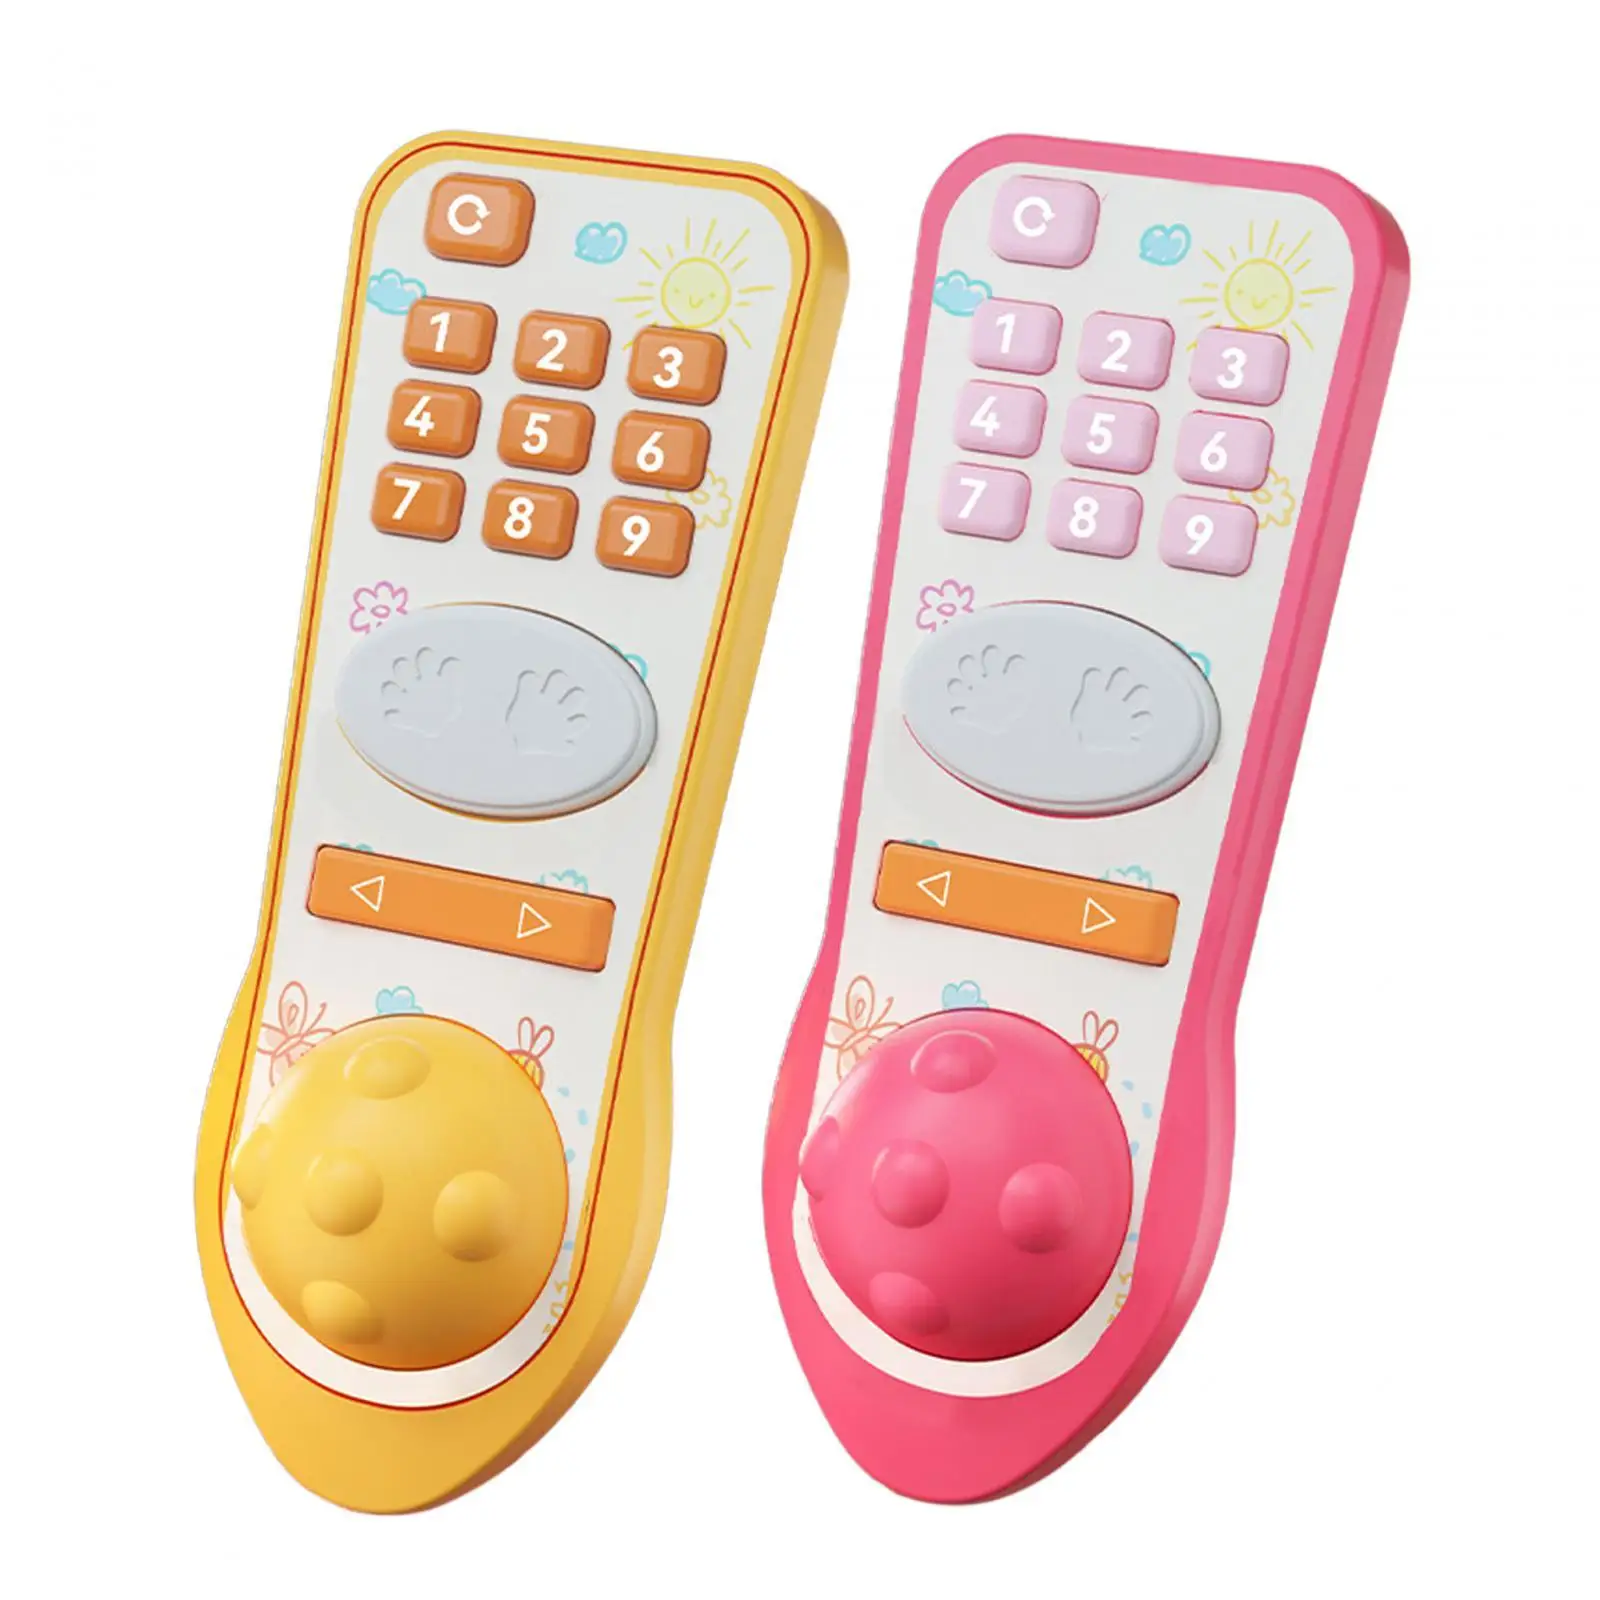 TV Remote Control Toy Durable with Soft Light and Sound Remote Toy Early Educational for Infants Baby 12 to 18 Months Boys Girls